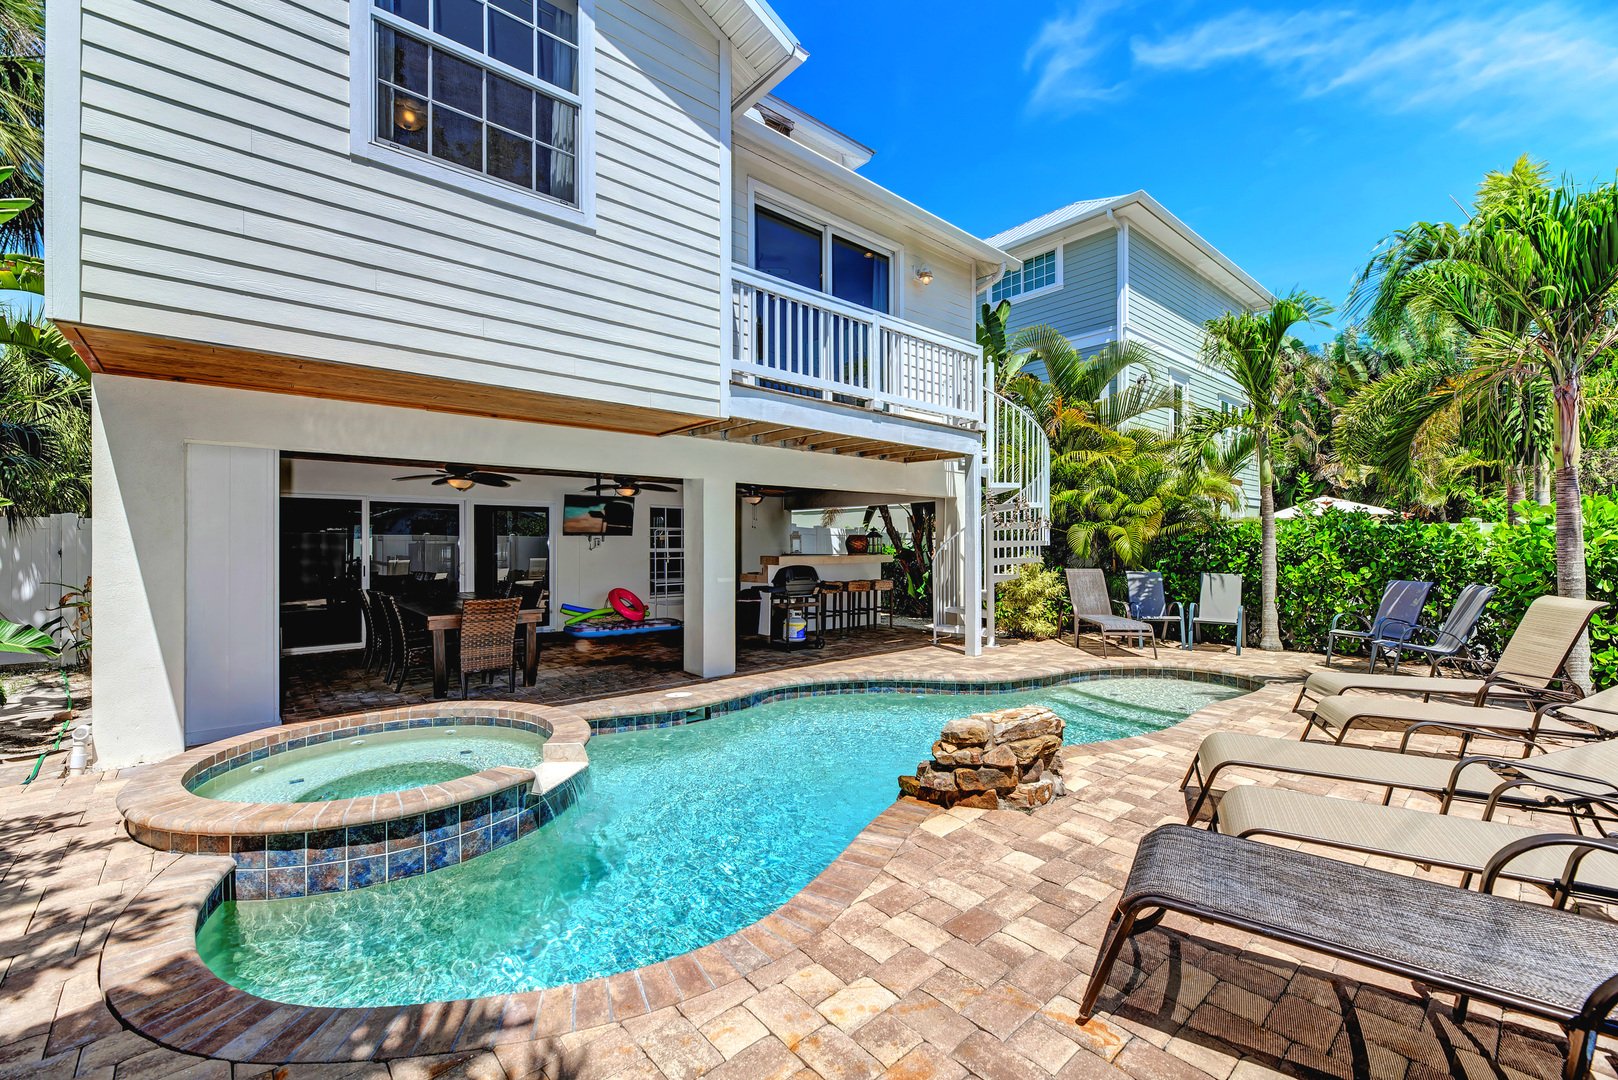 The backyard pool of one of our Anna Maria Last Minute Rentals